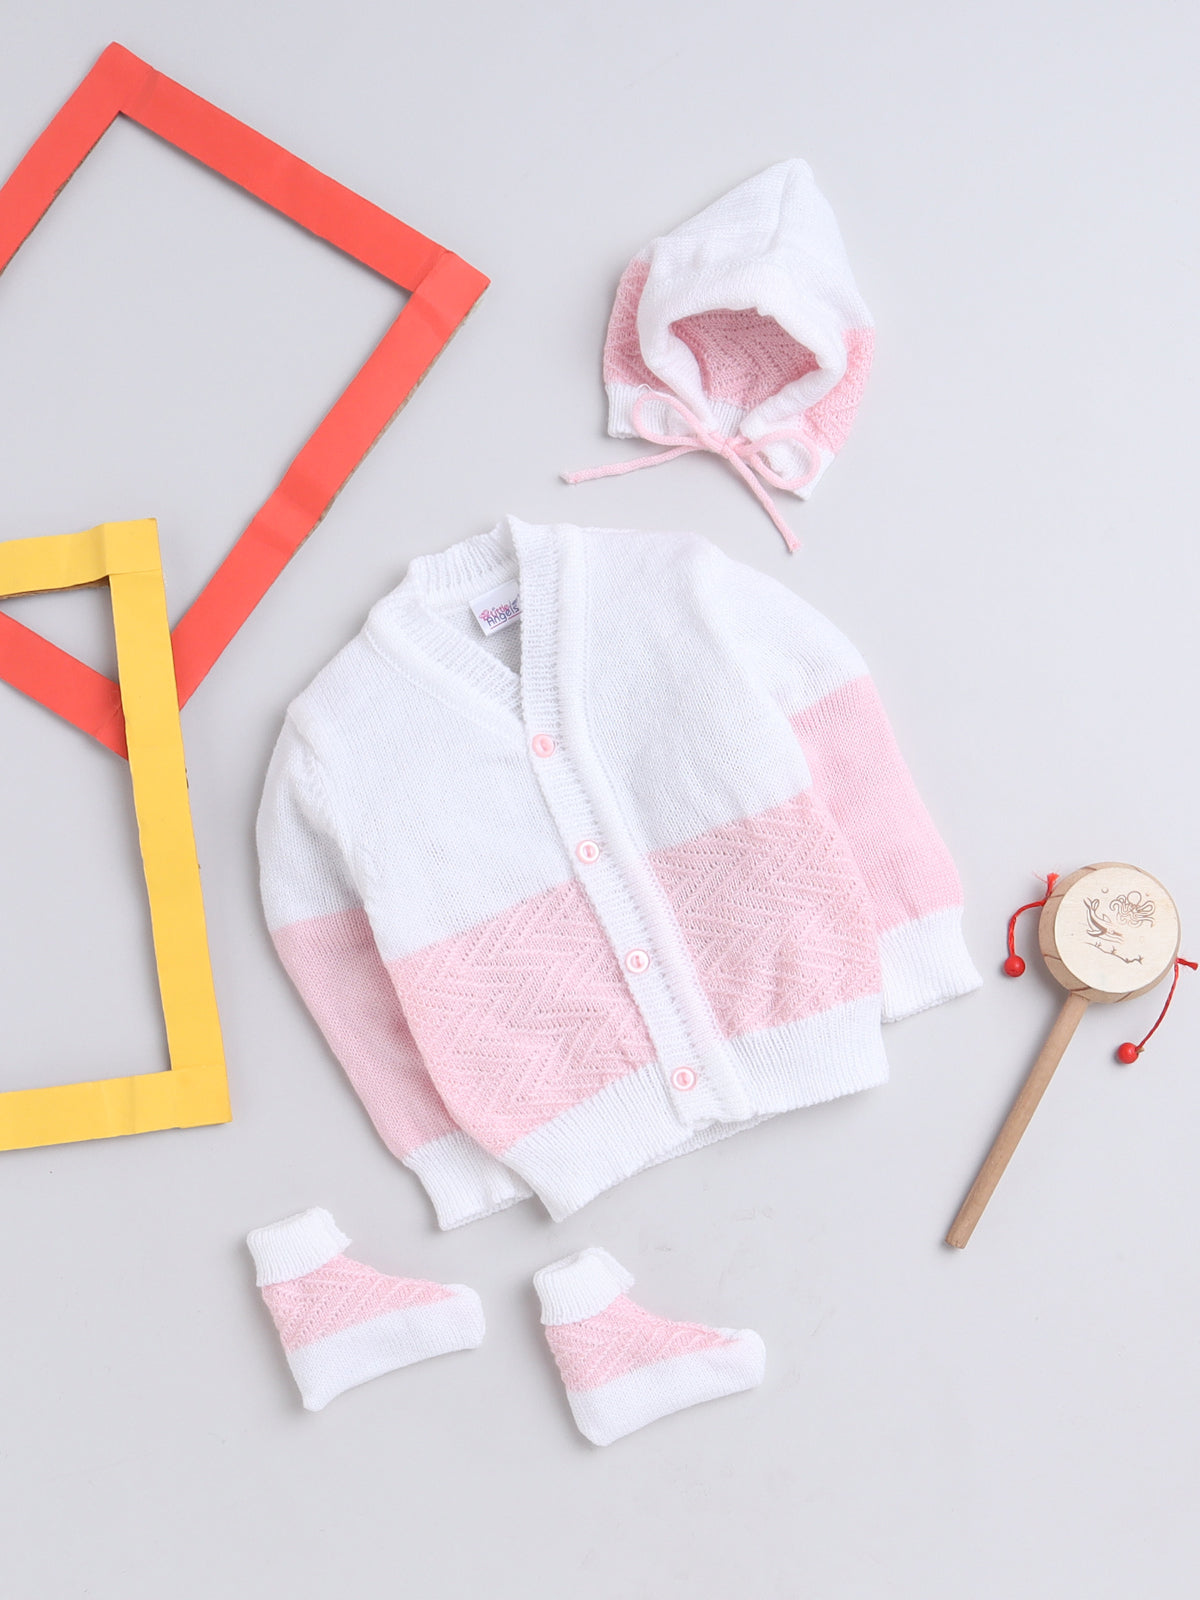 3 Pcs Sweater Full Sleeve Front Open Half Zig-Zag pattern White and pink with Matching Caps and Socks for Baby